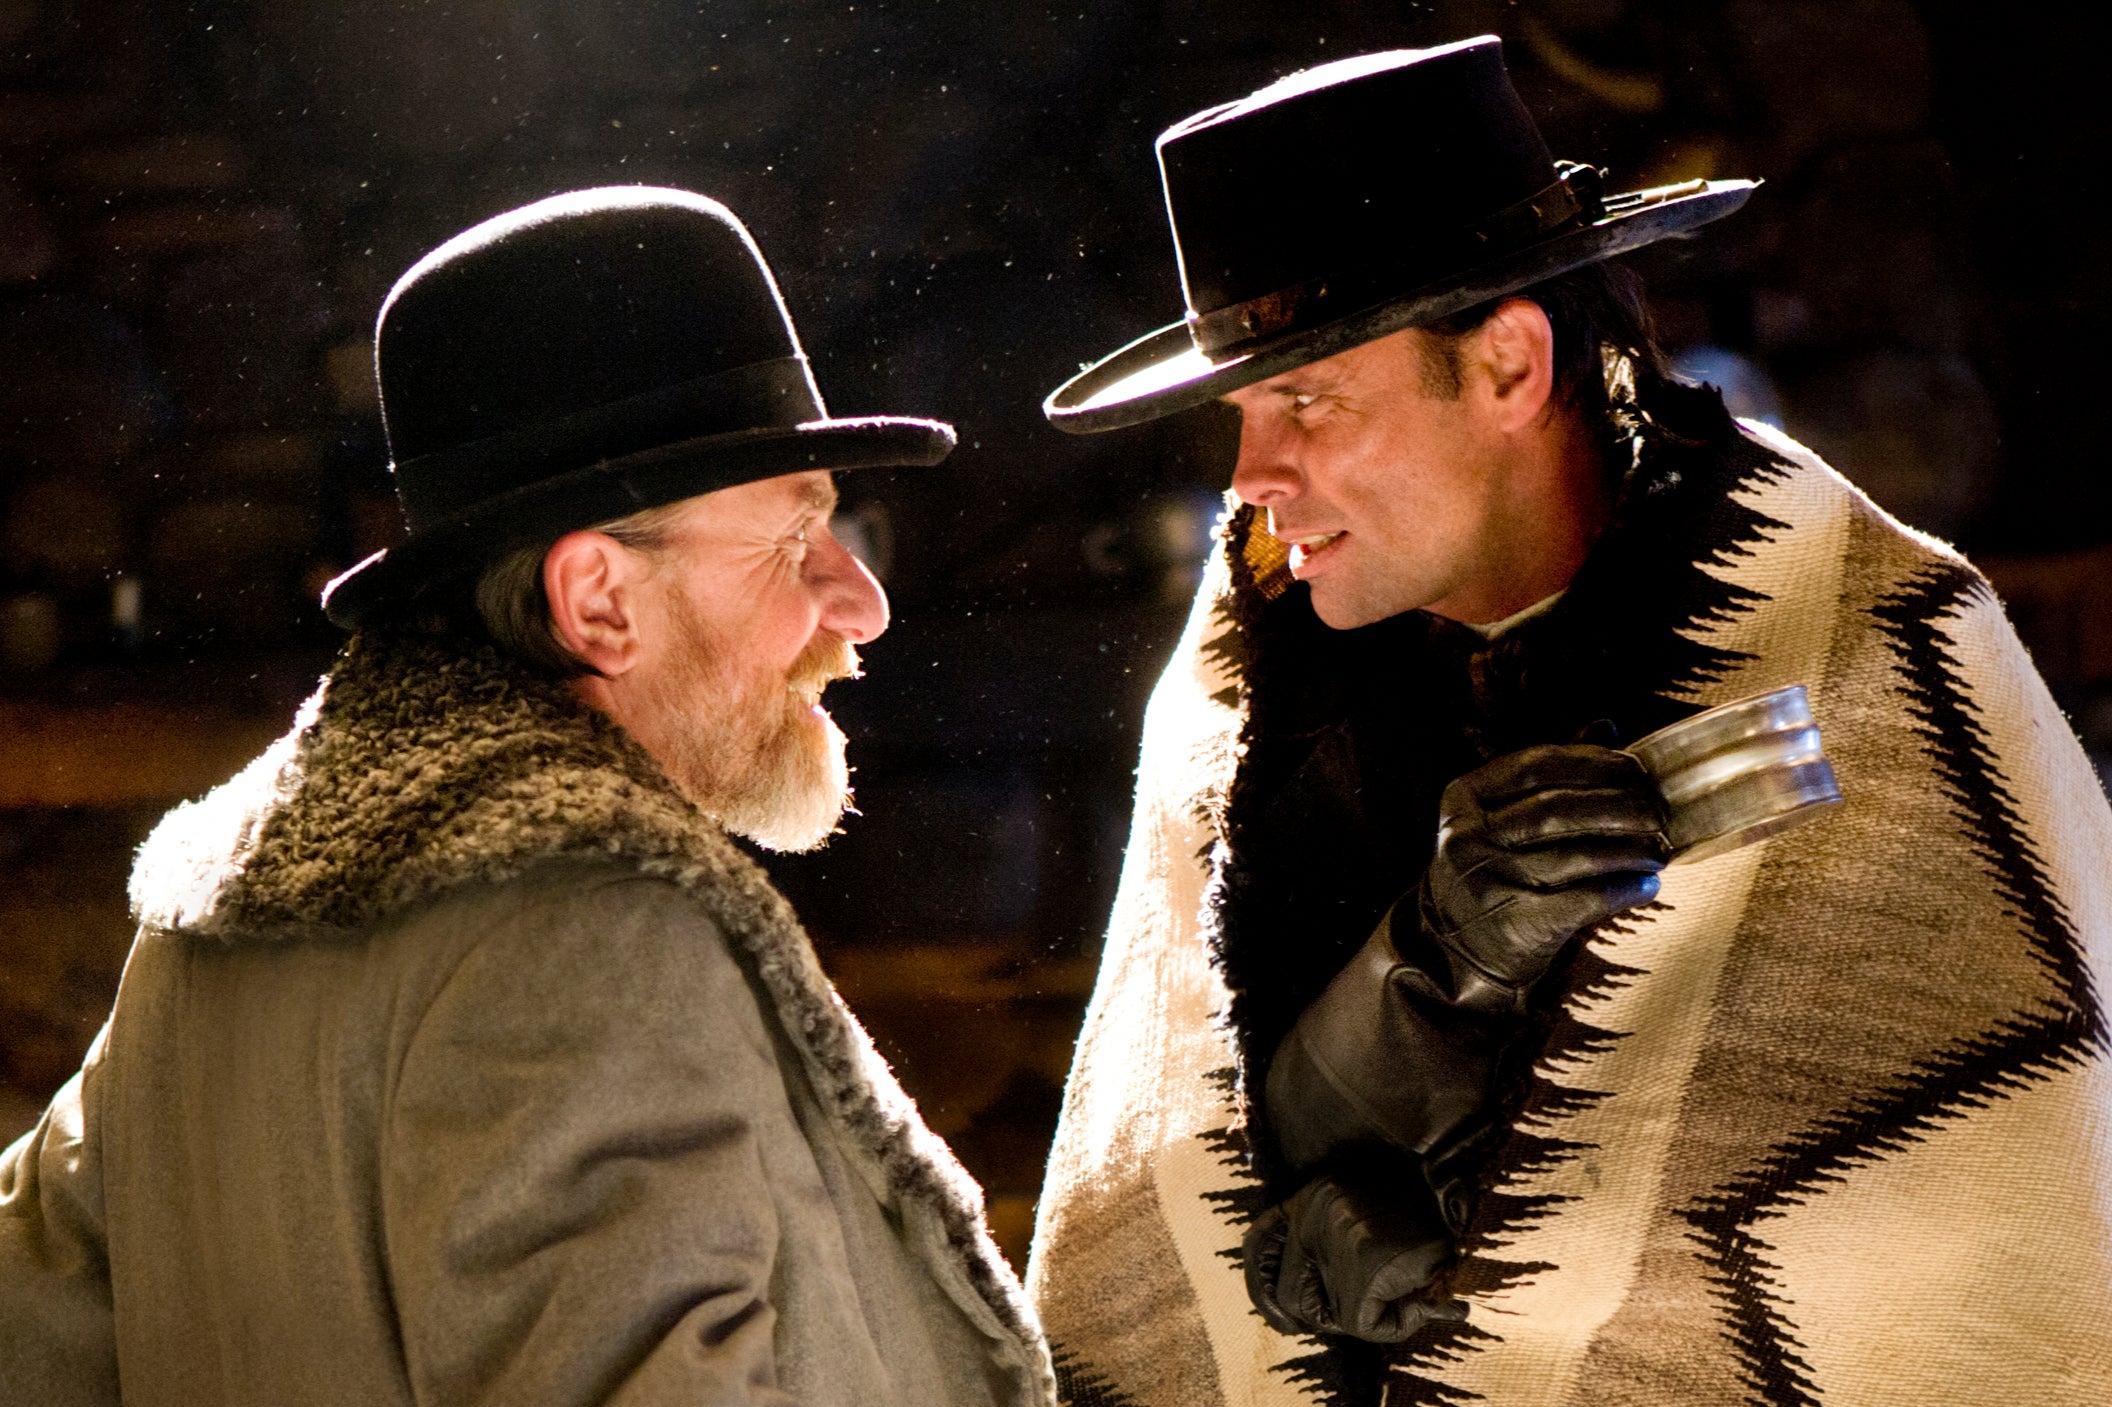 Tim Roth and Walton Goggins in ‘The Hateful Eight’